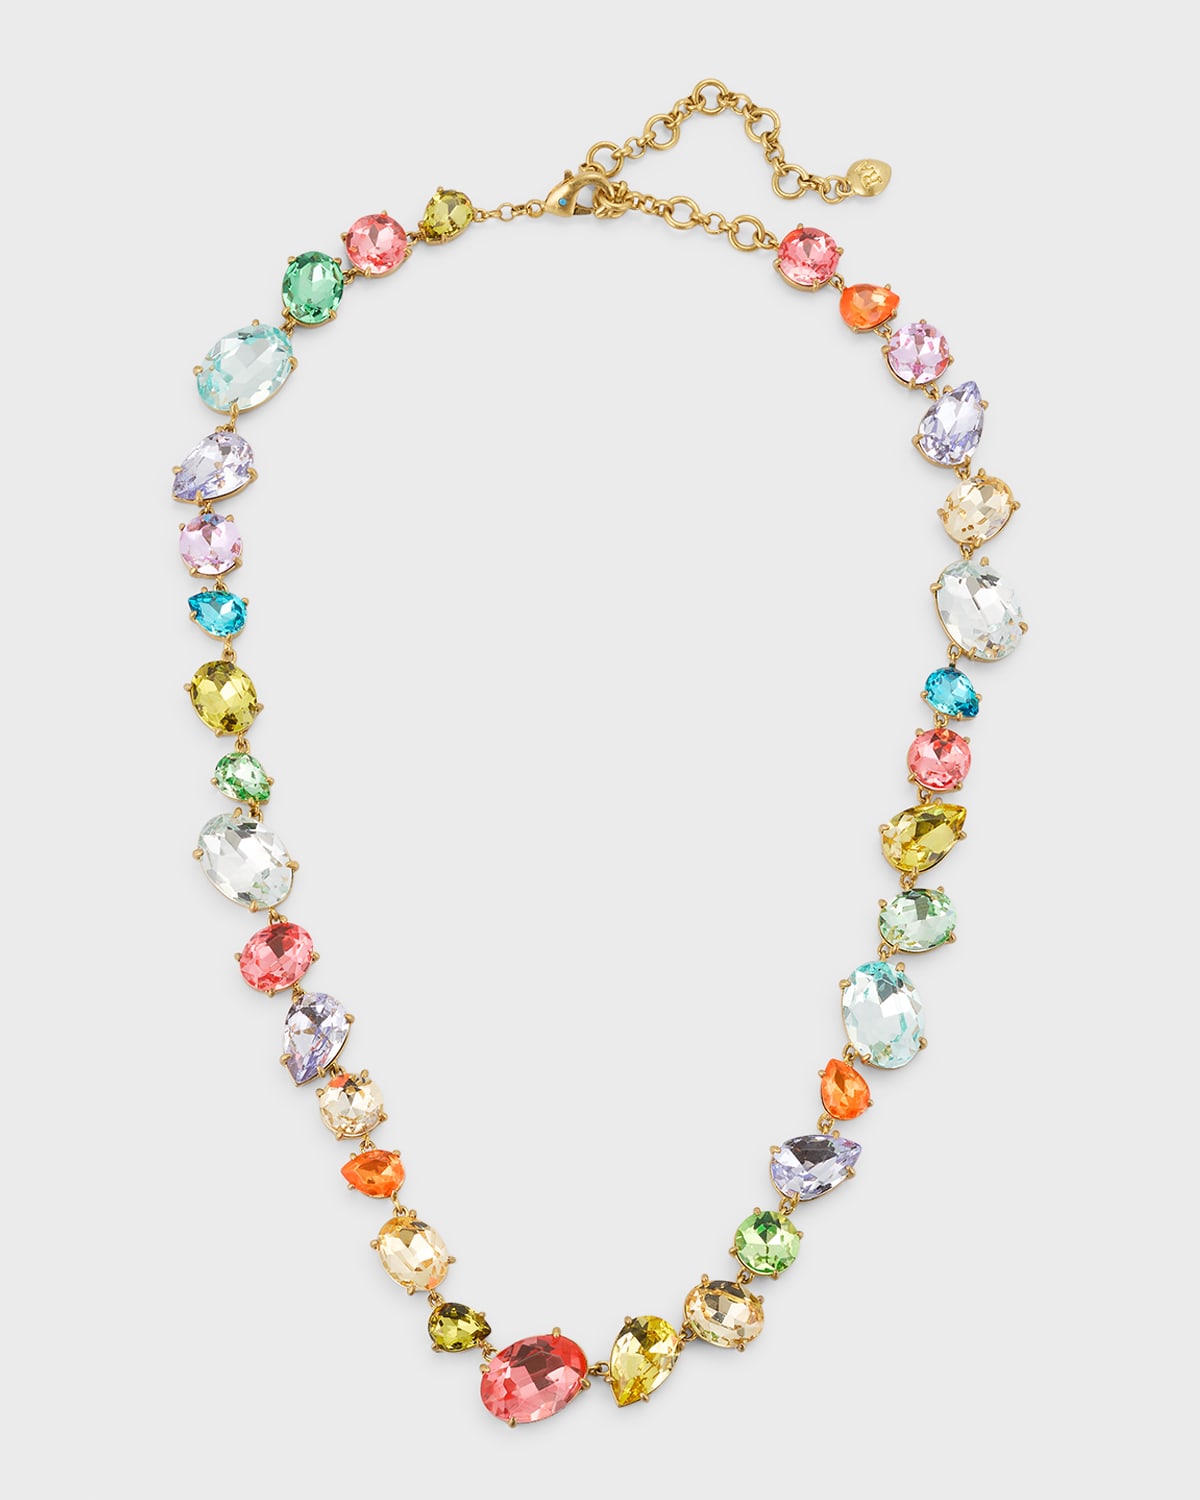 ROXANNE ASSOULIN THE MAD MERRY MARVELOUS NECKLACE